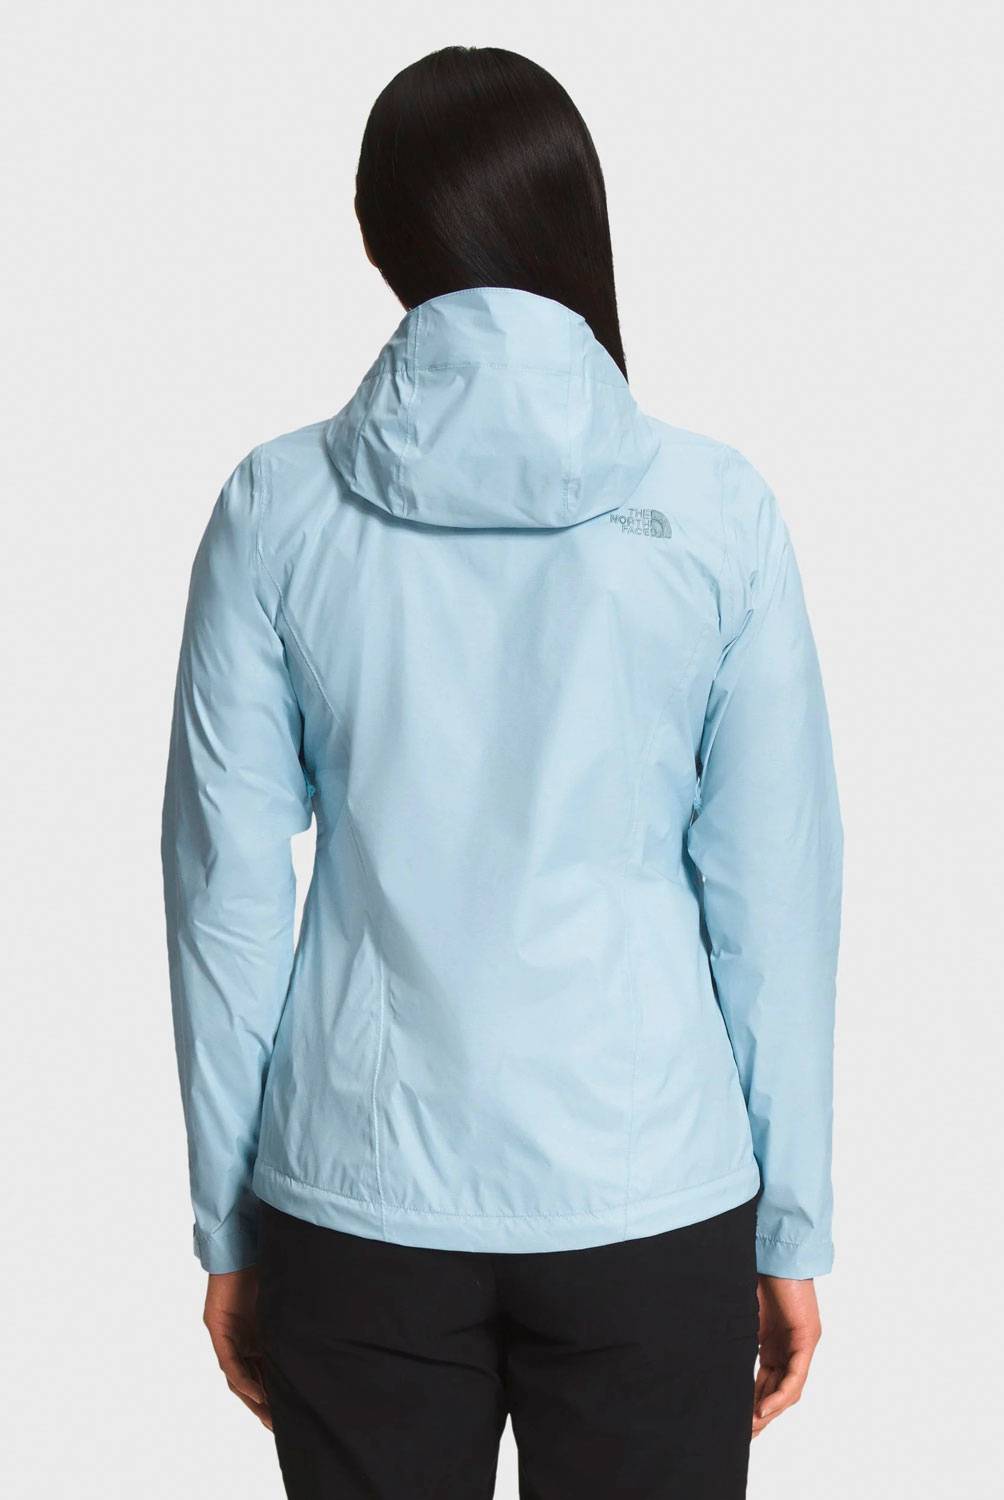 THE NORTH FACE - The North Face Chaqueta Mujer